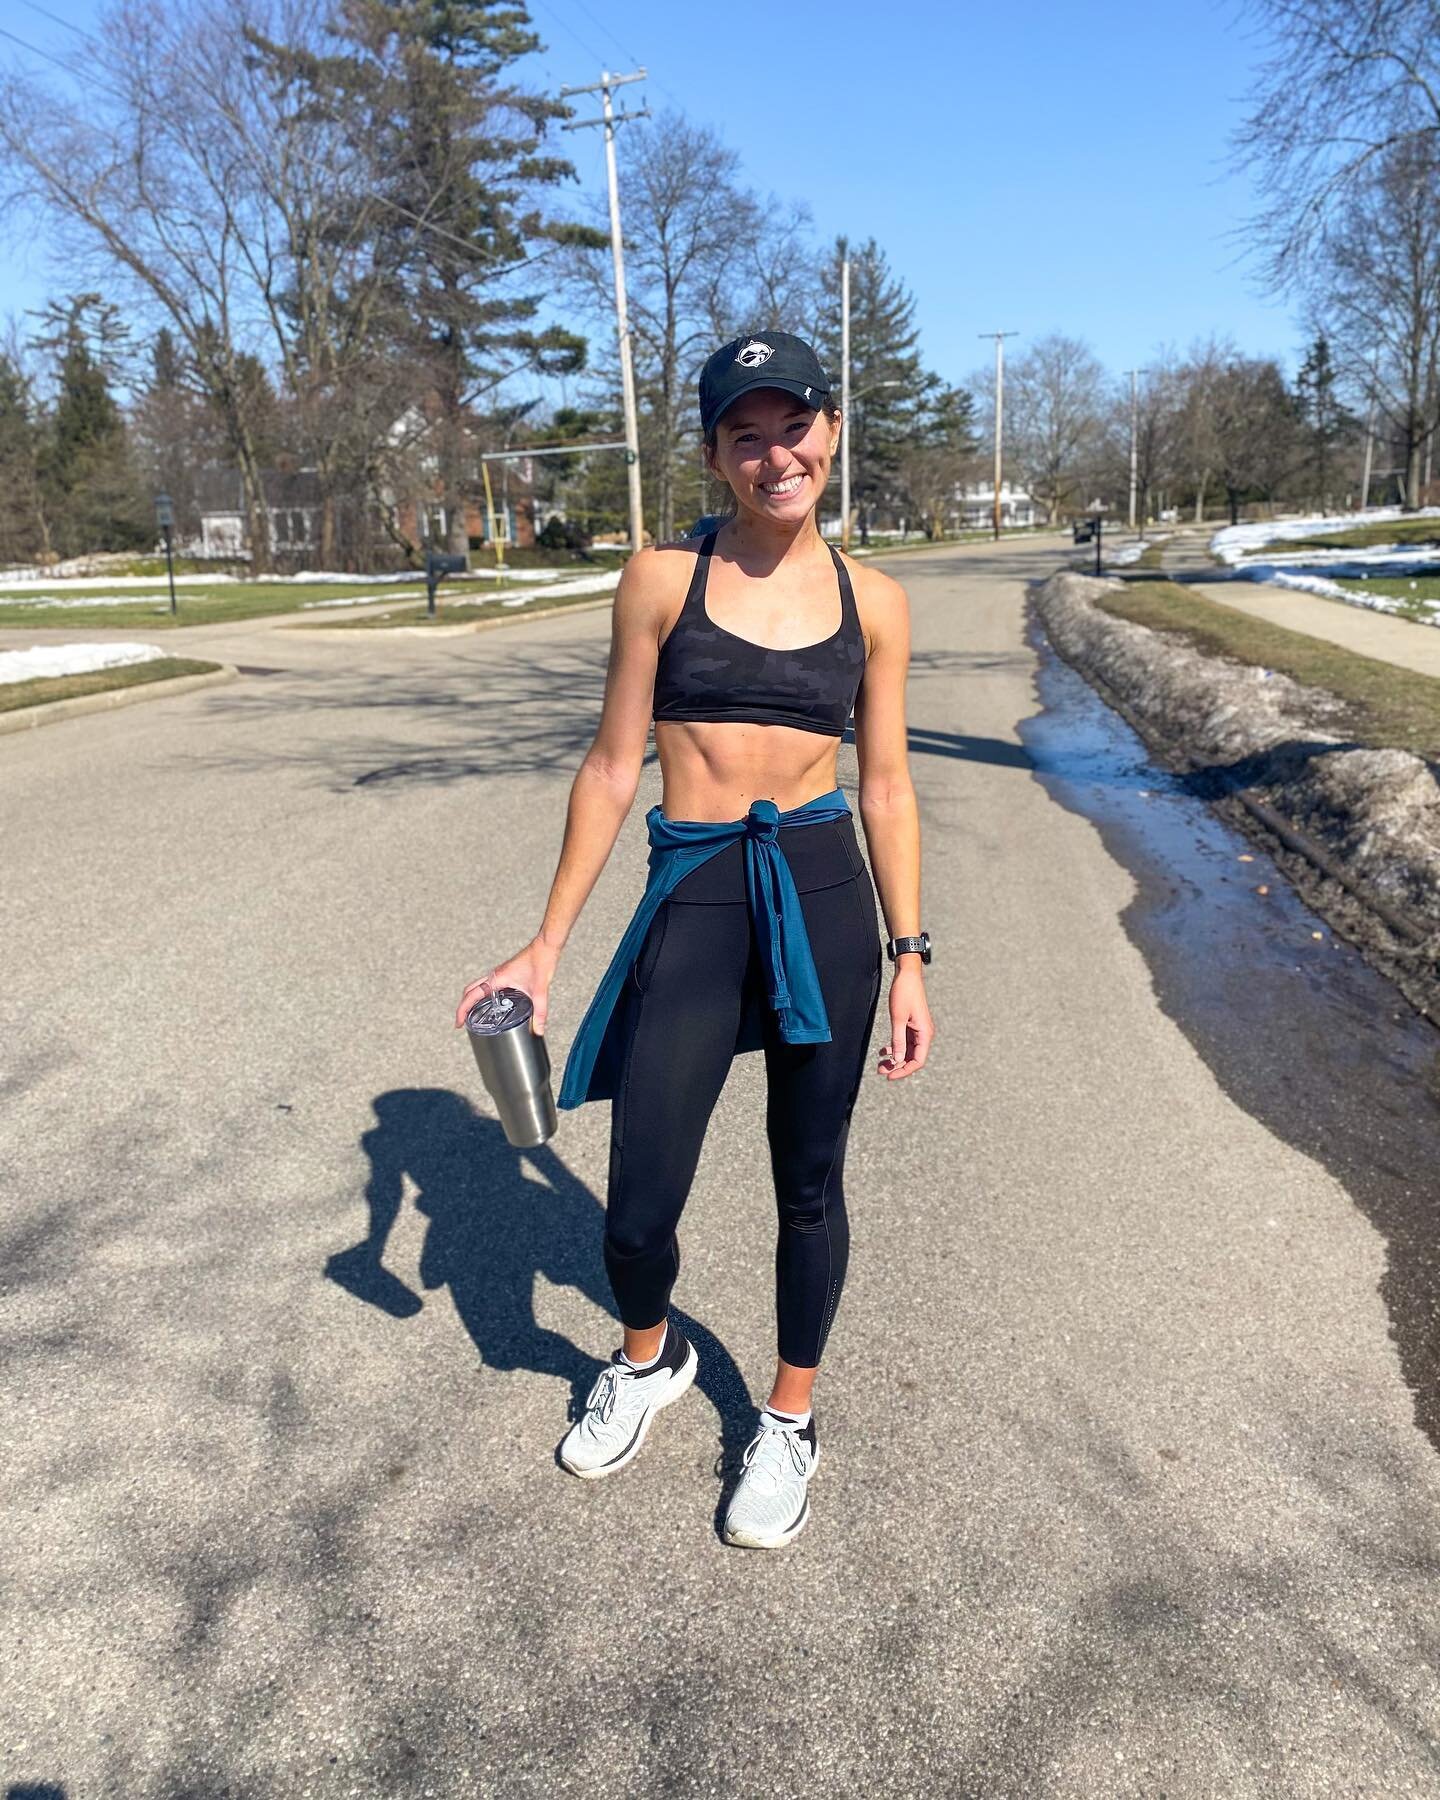 All smiles for these miles ✨&thinsp;
&thinsp;
So thankful to shed layers during the run today-took until the final mile to toast up, but it happened! Looking forward to the spring weather coming our way-hold on folks-we&rsquo;ve got this, the end of 